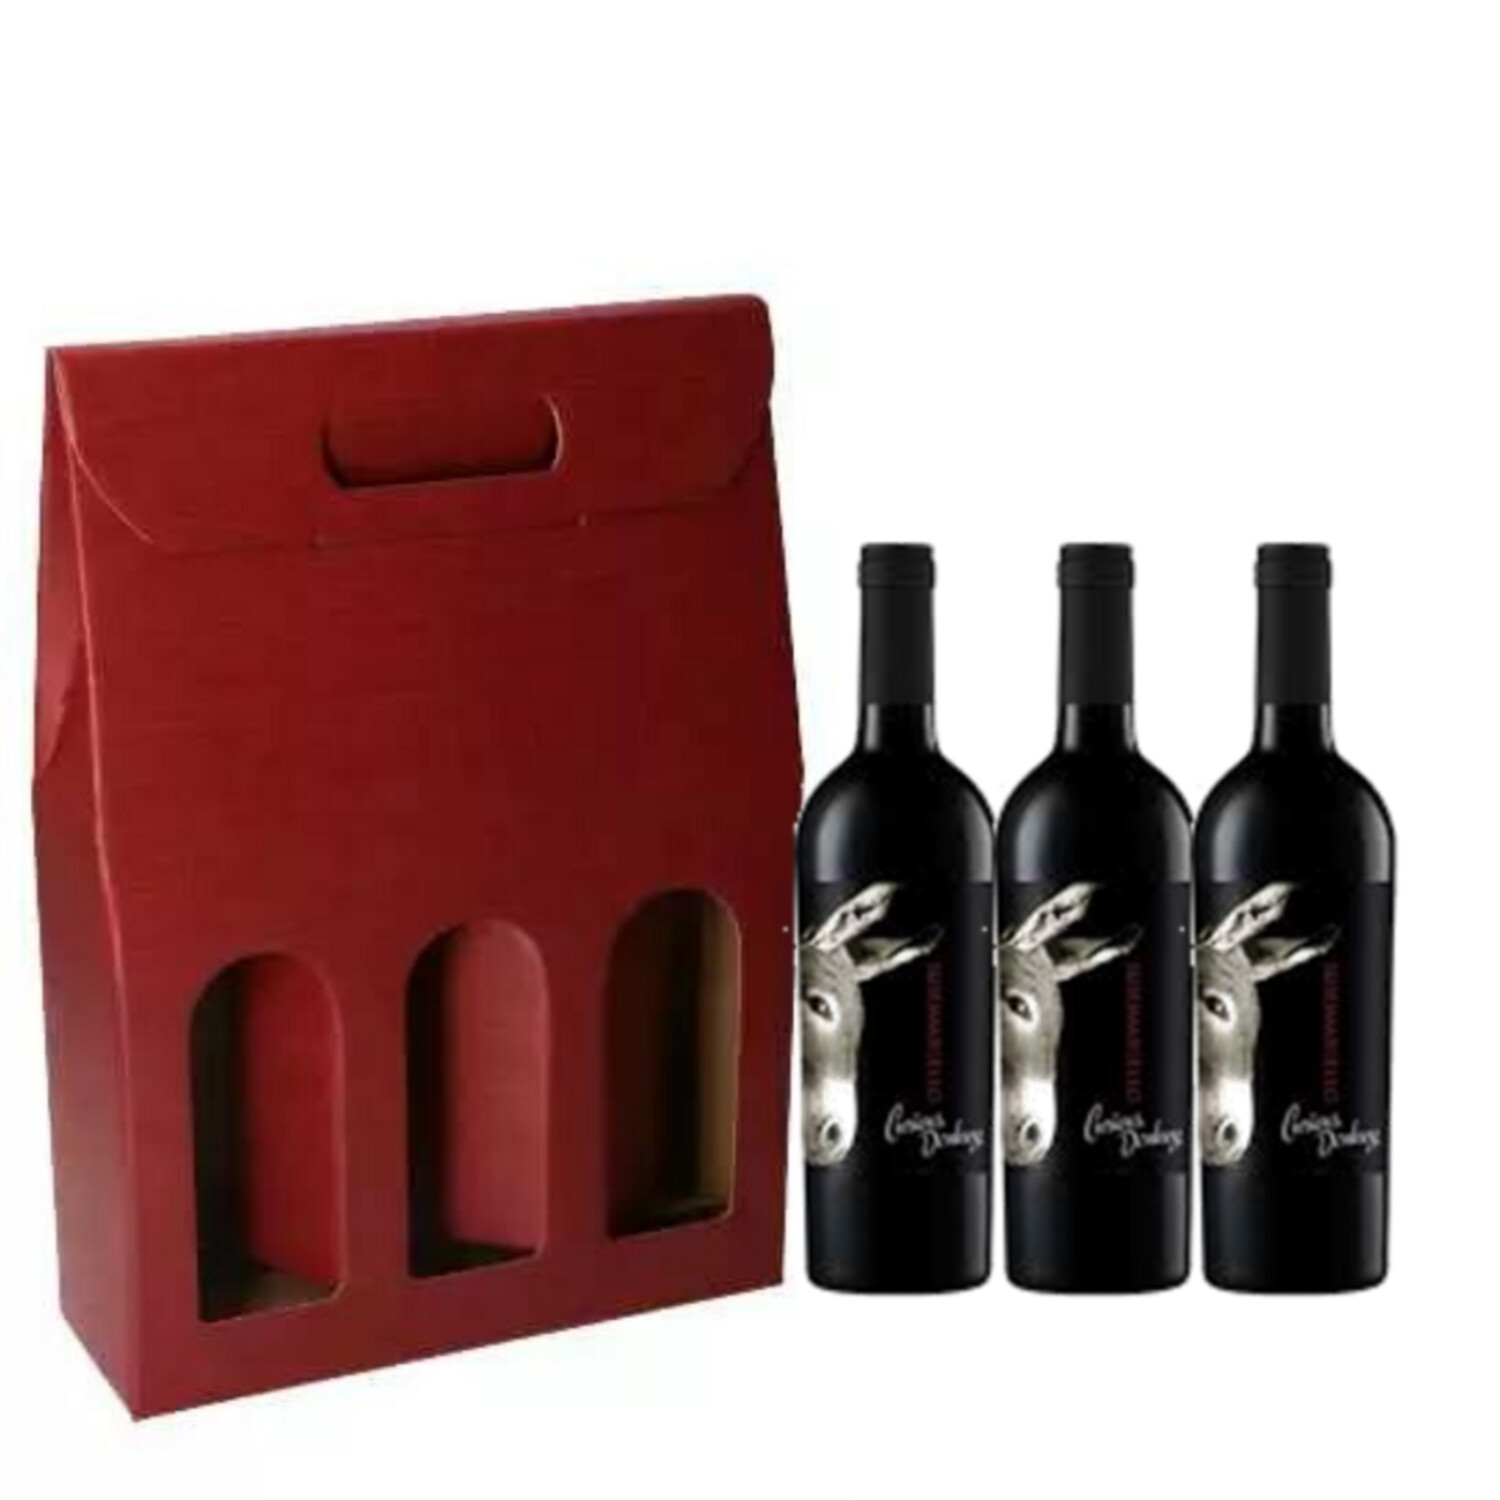 3 bottles of Curious Donkey "Susumaniello" in gift box